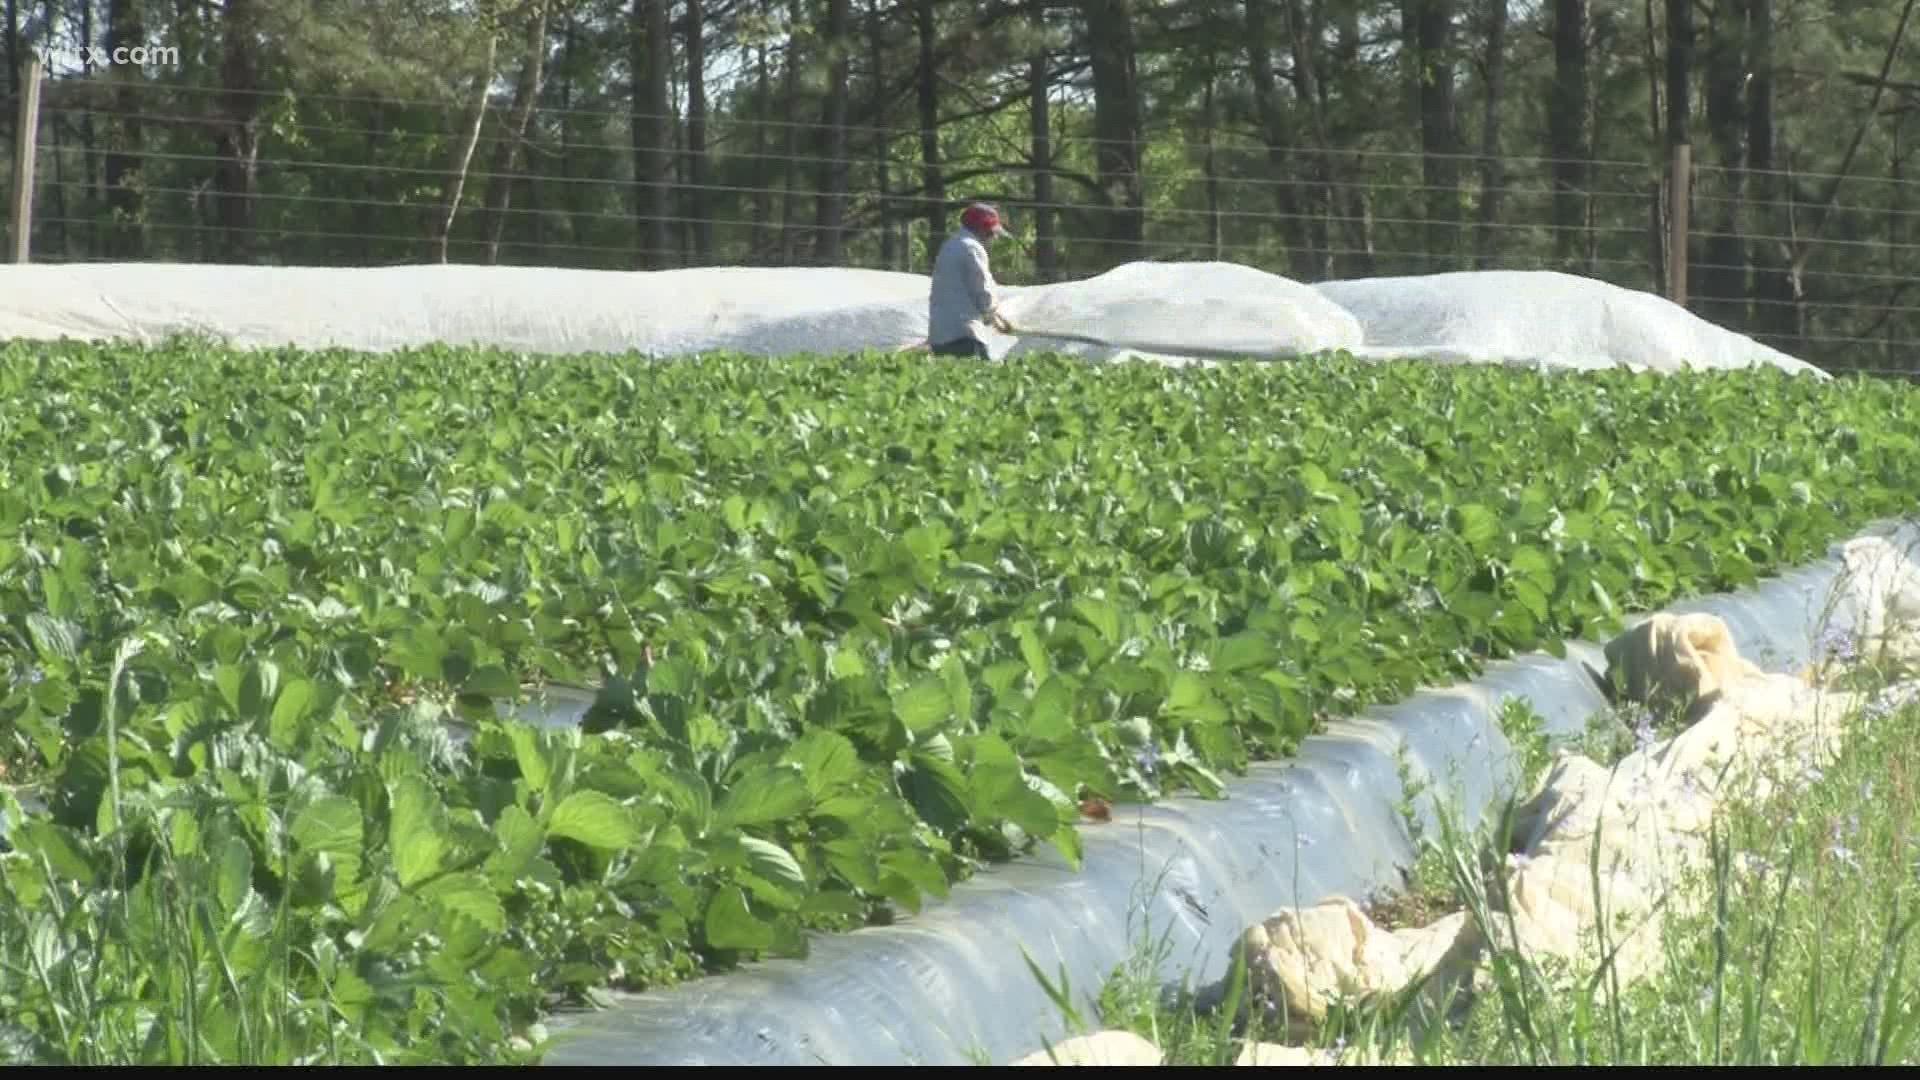 South Carolina’s agriculture chief plans to ask lawmakers for $75 million to help bring processing and packing facilities to the state.